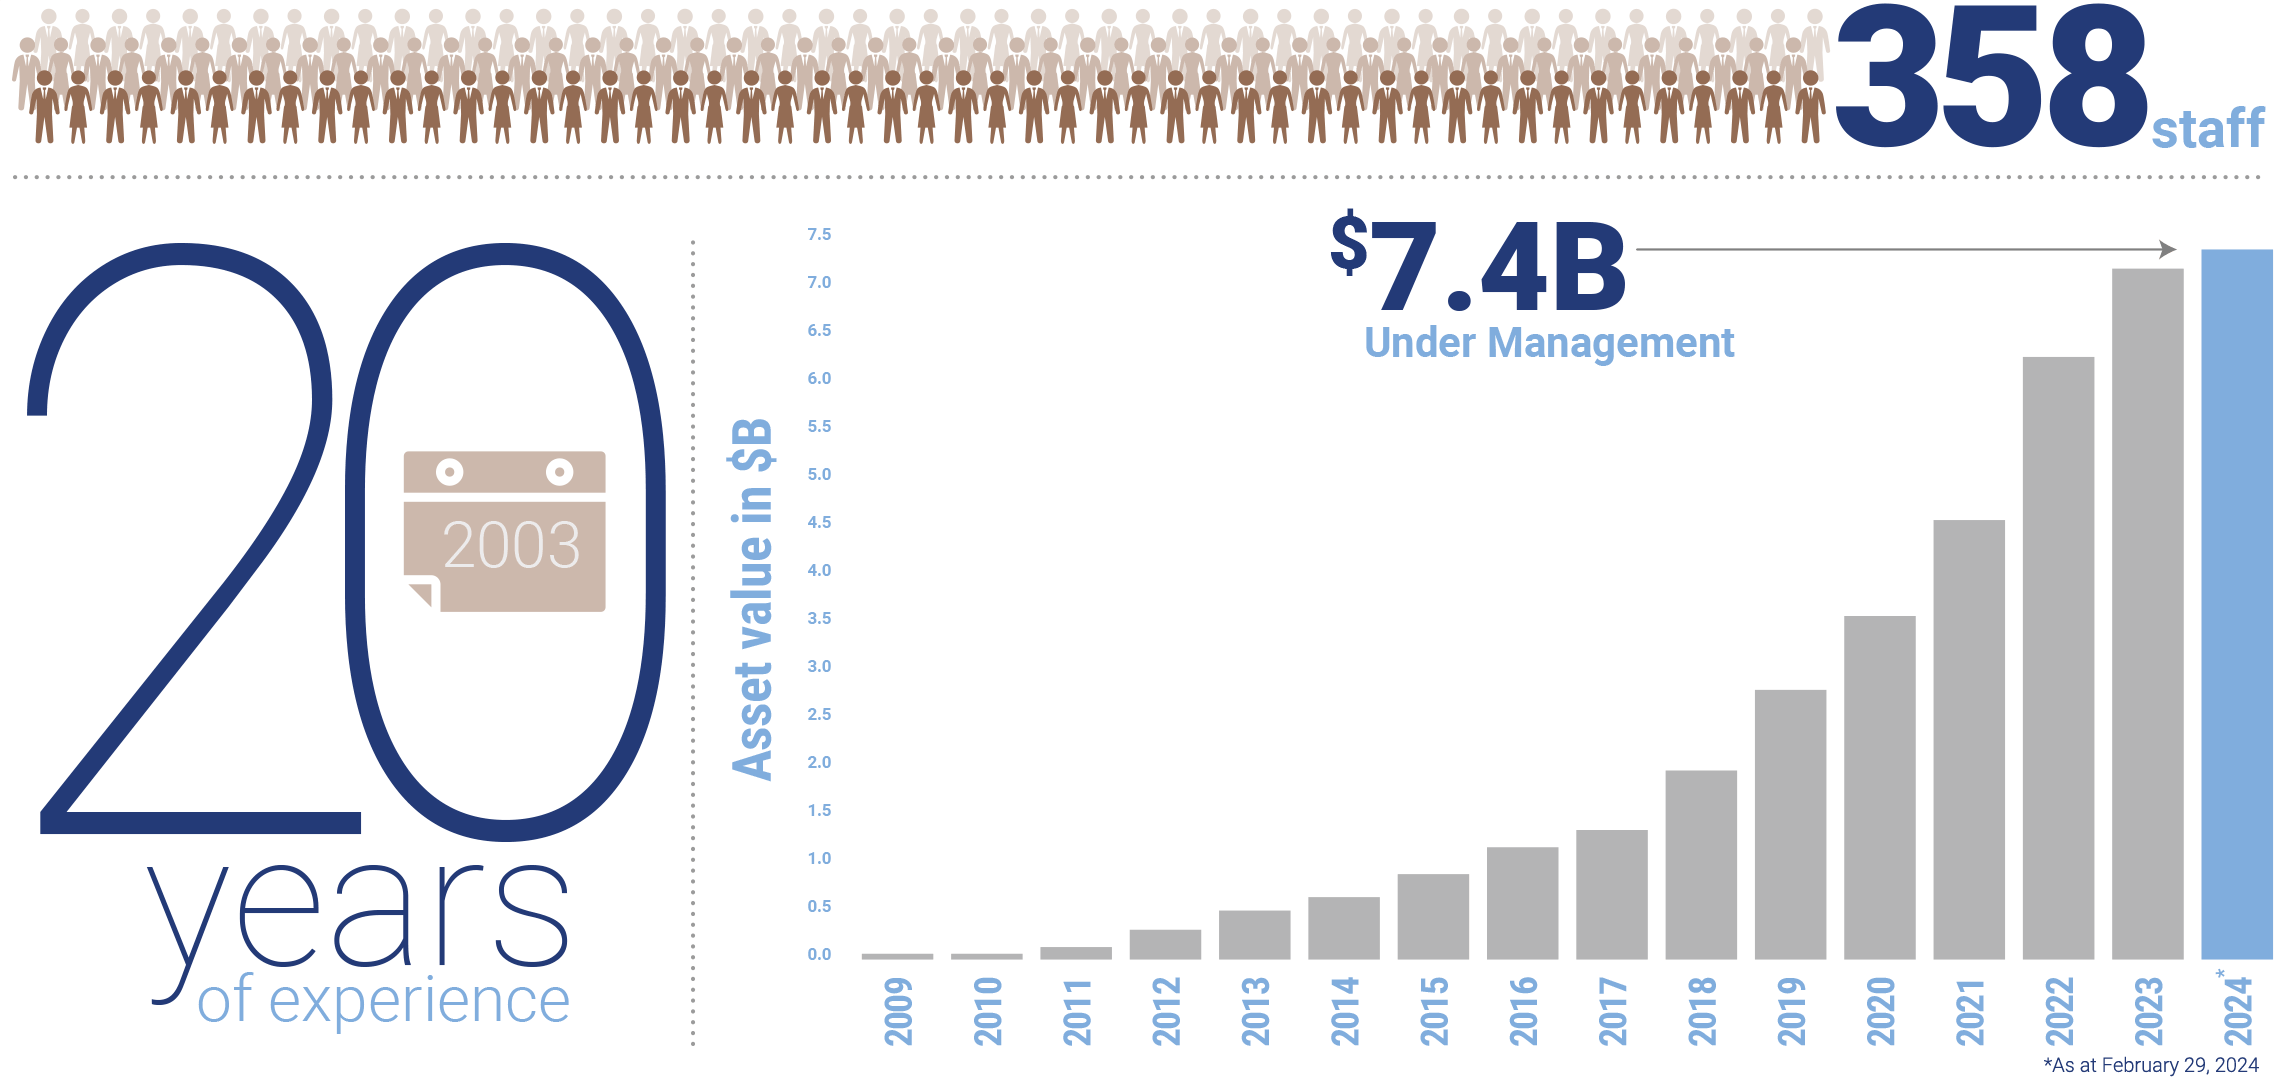 19 years of experience, 320 staff, over $6.2 billion under management as of November 30, 2022